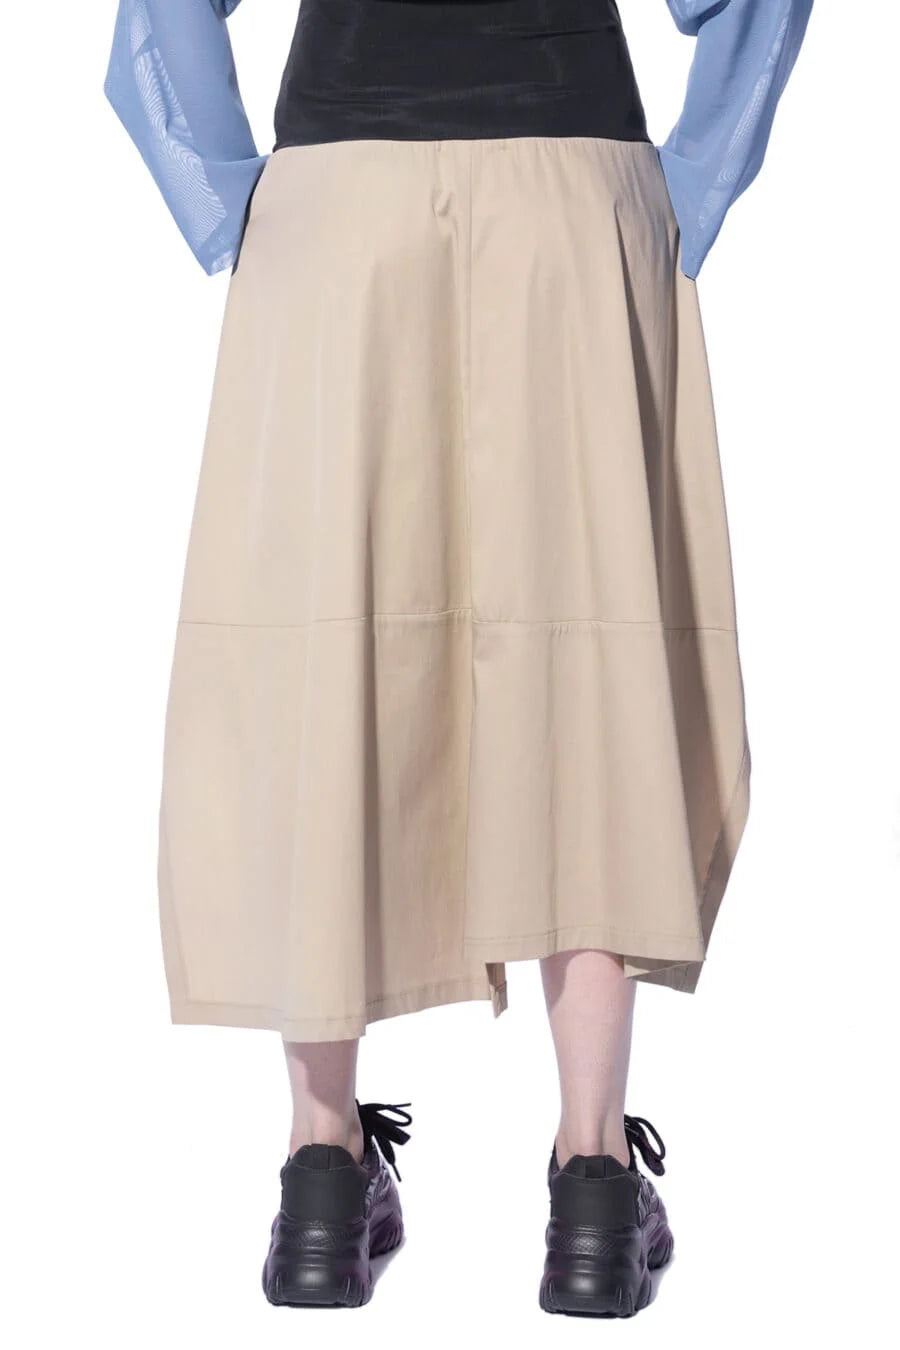 Art Point Tulip skirt with zip and big pockets